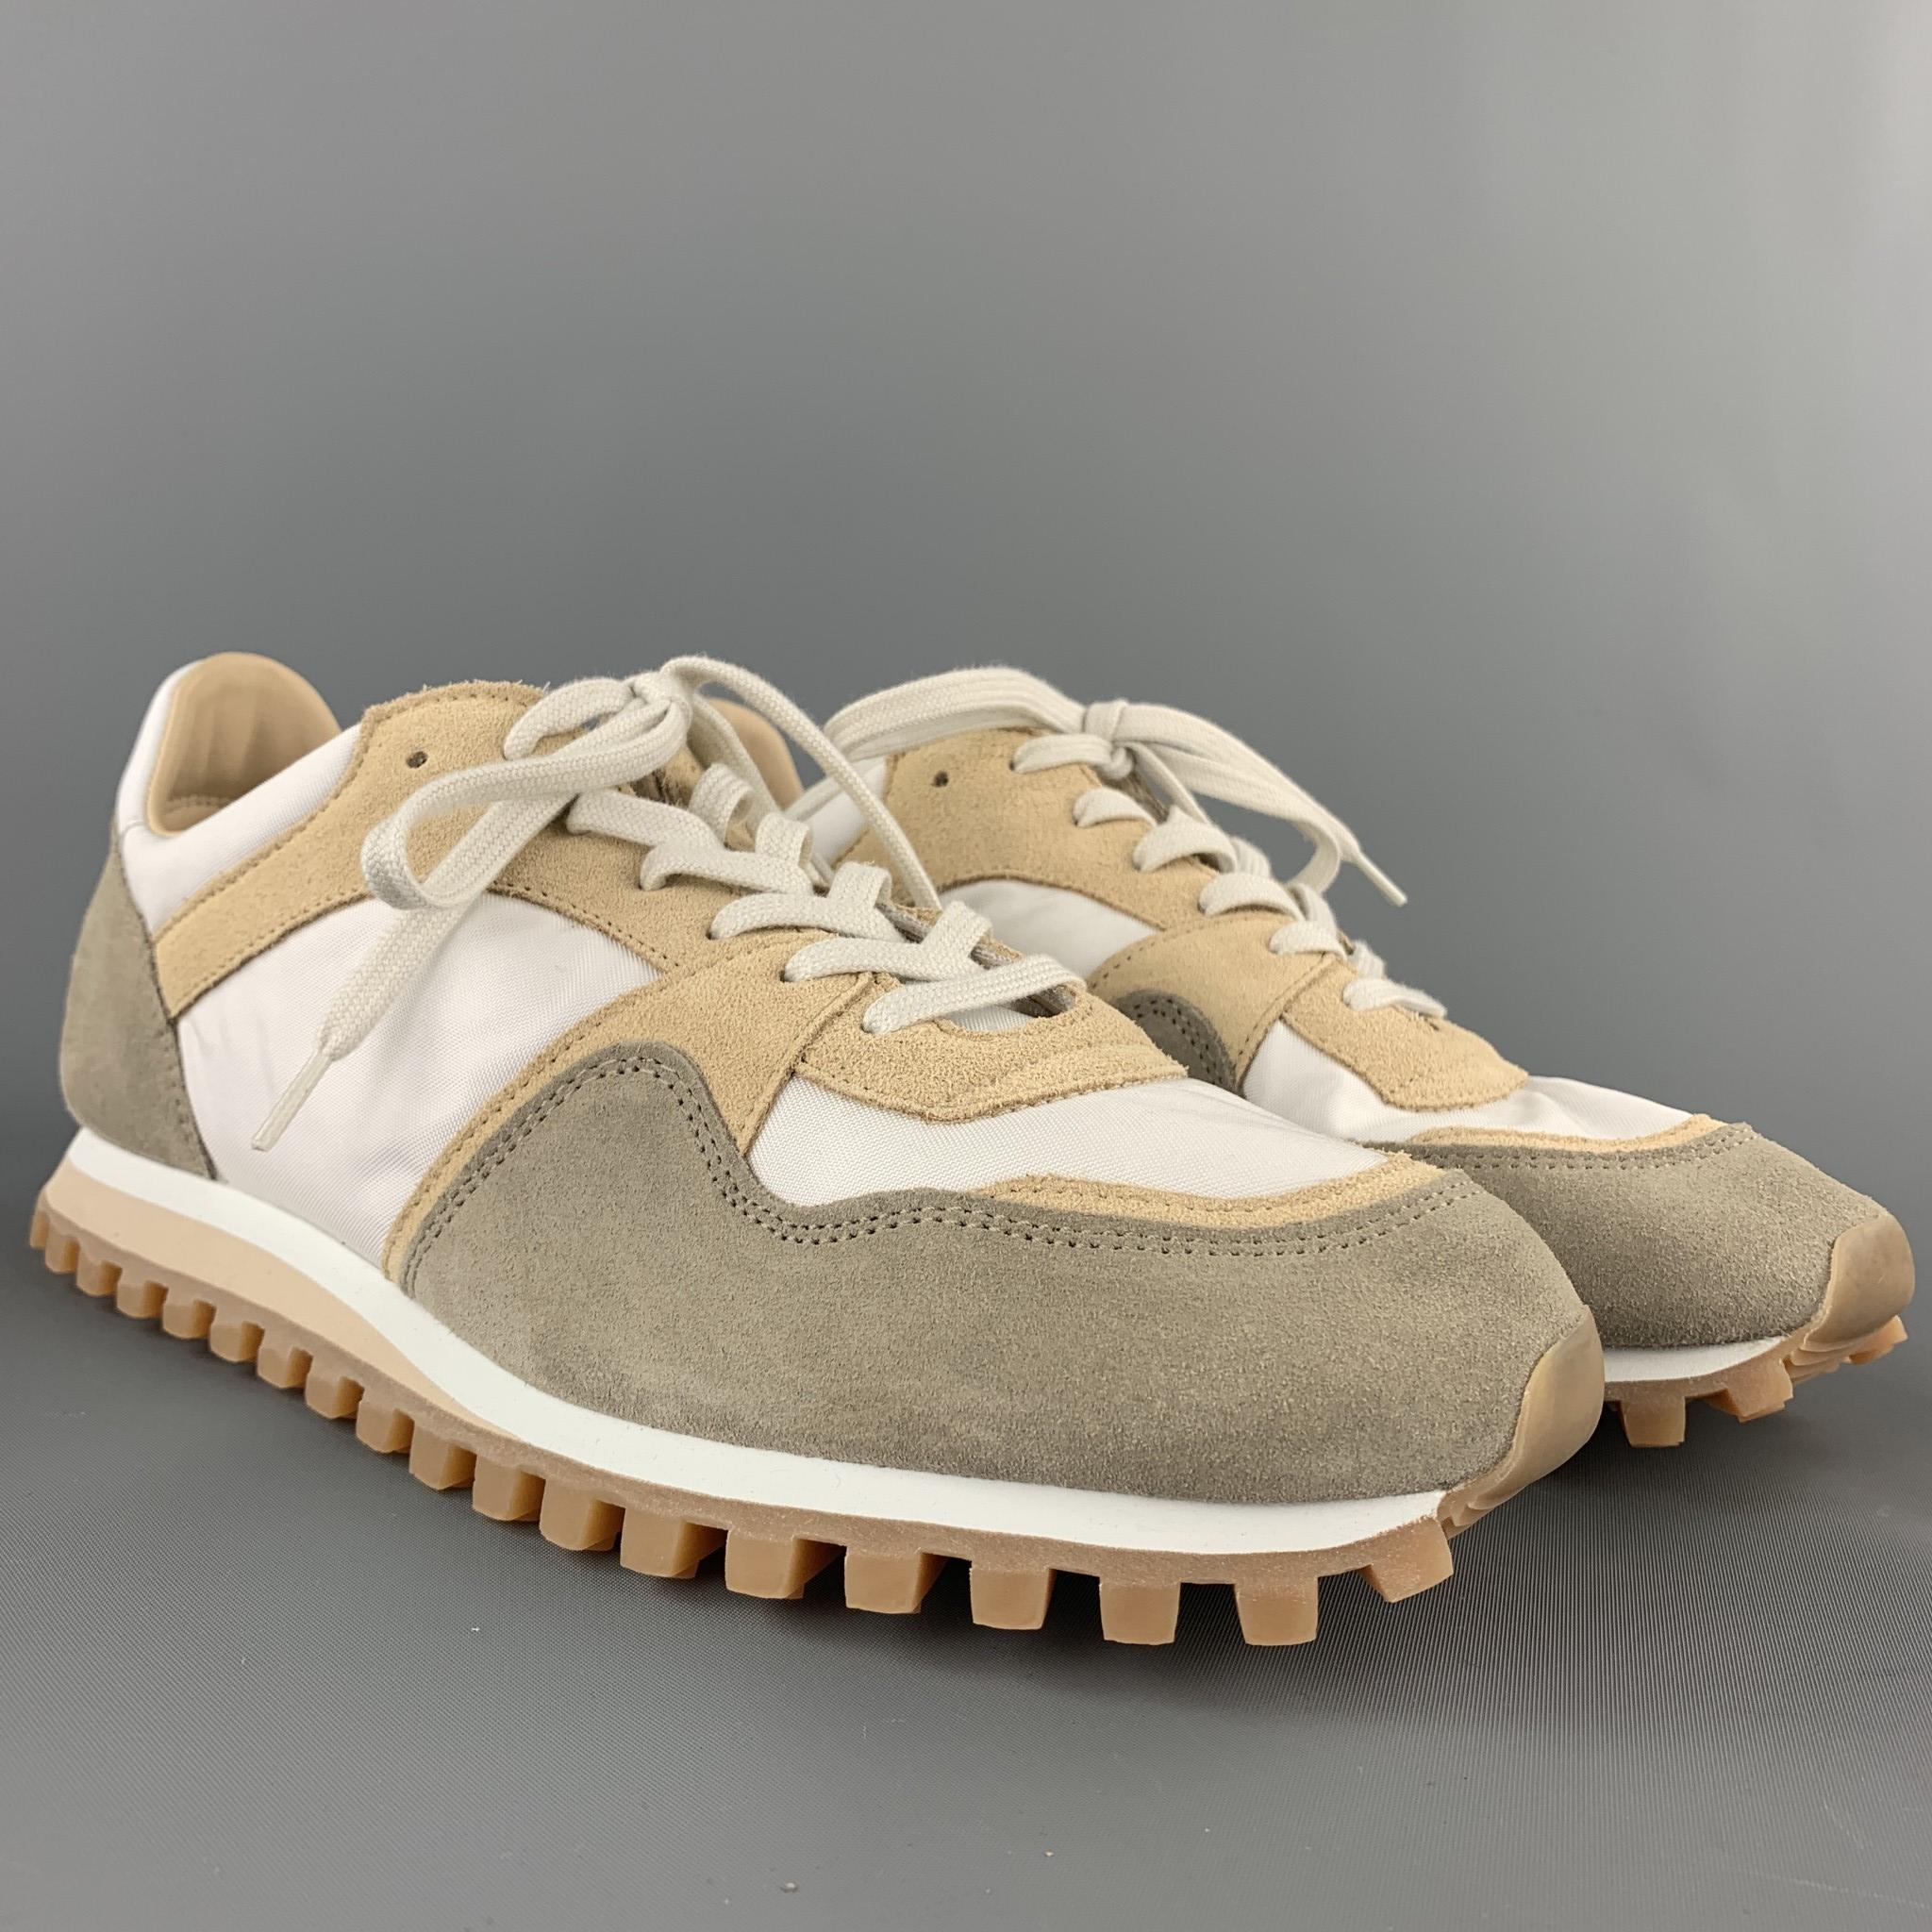 SPALWART sneakers comes in a white & beige mixed material nylon featuring a rubber sole and a lace up closure.

Very Good Pre-Owned Condition.
Marked: 42

Outsole:

11 in. x 4 in. 